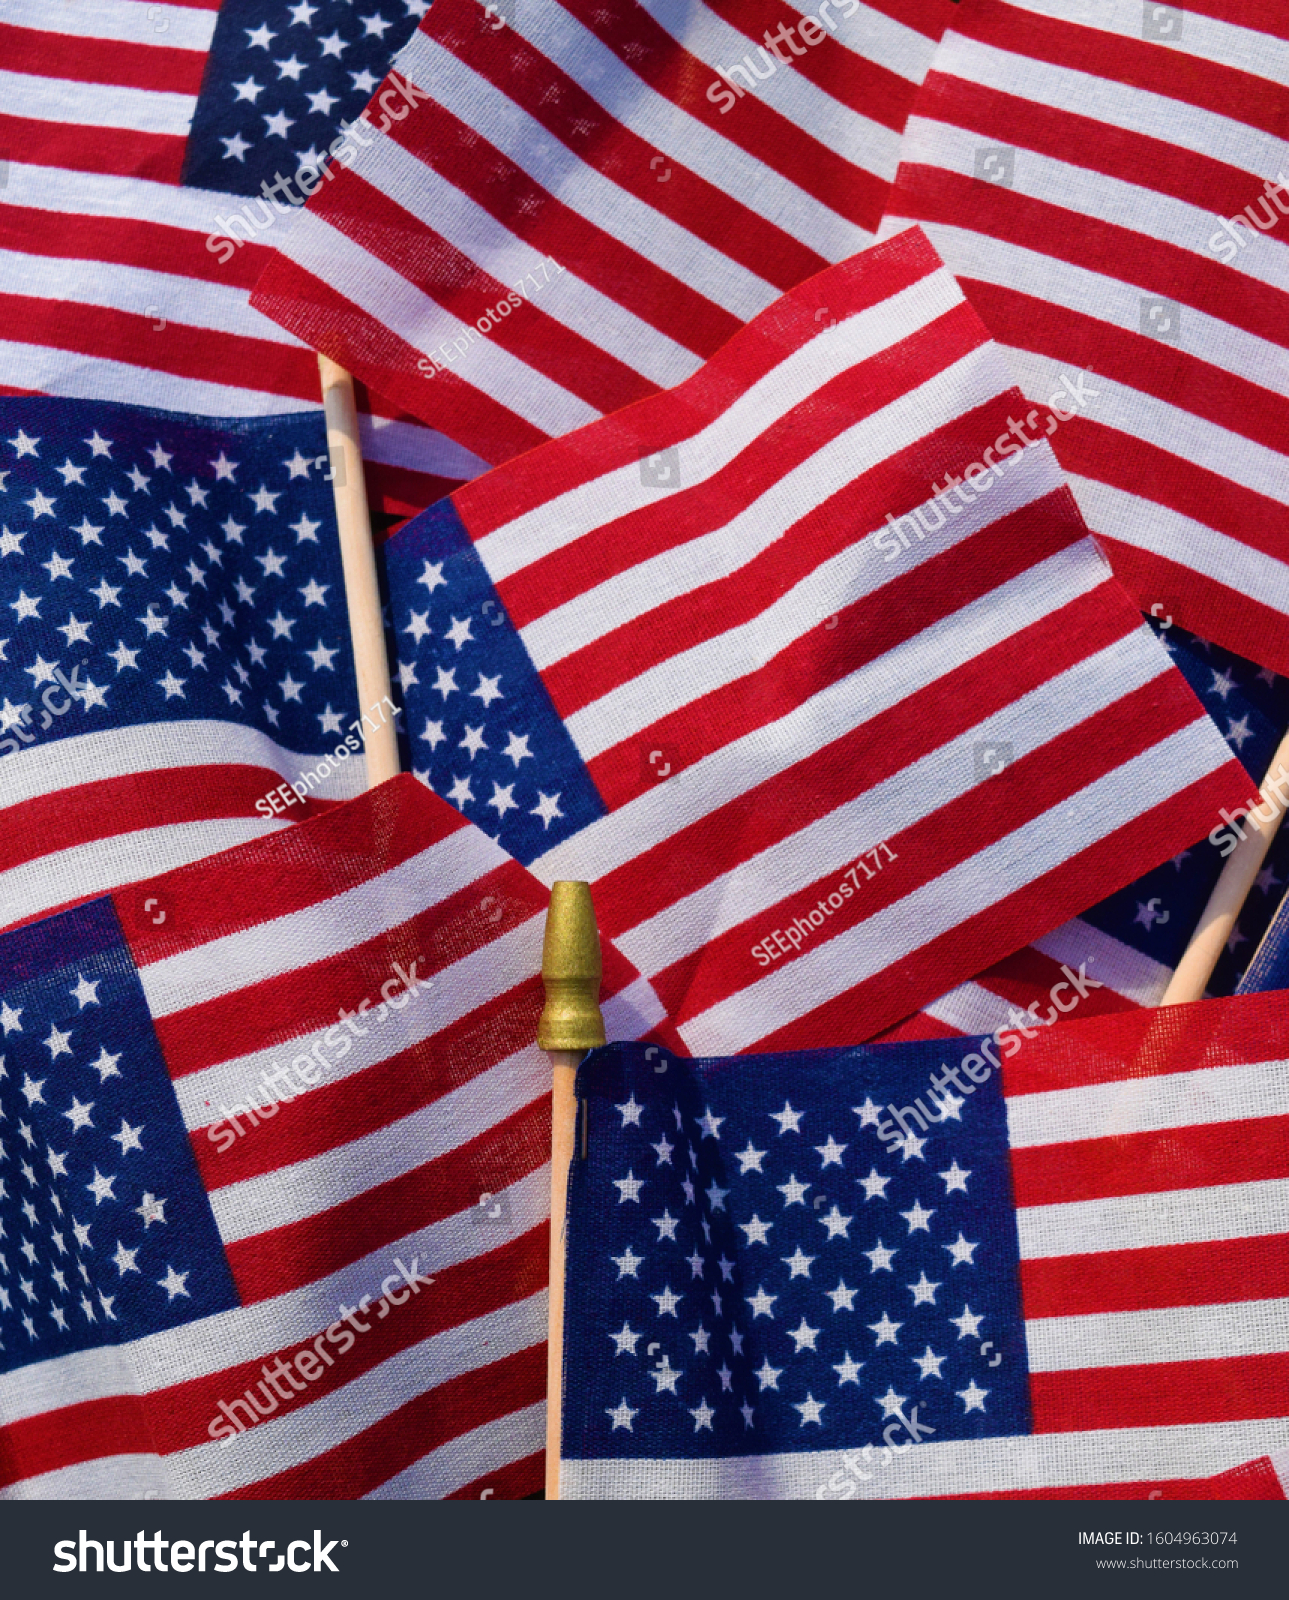 American stick flags in a pile in an array of patriotic colors #1604963074